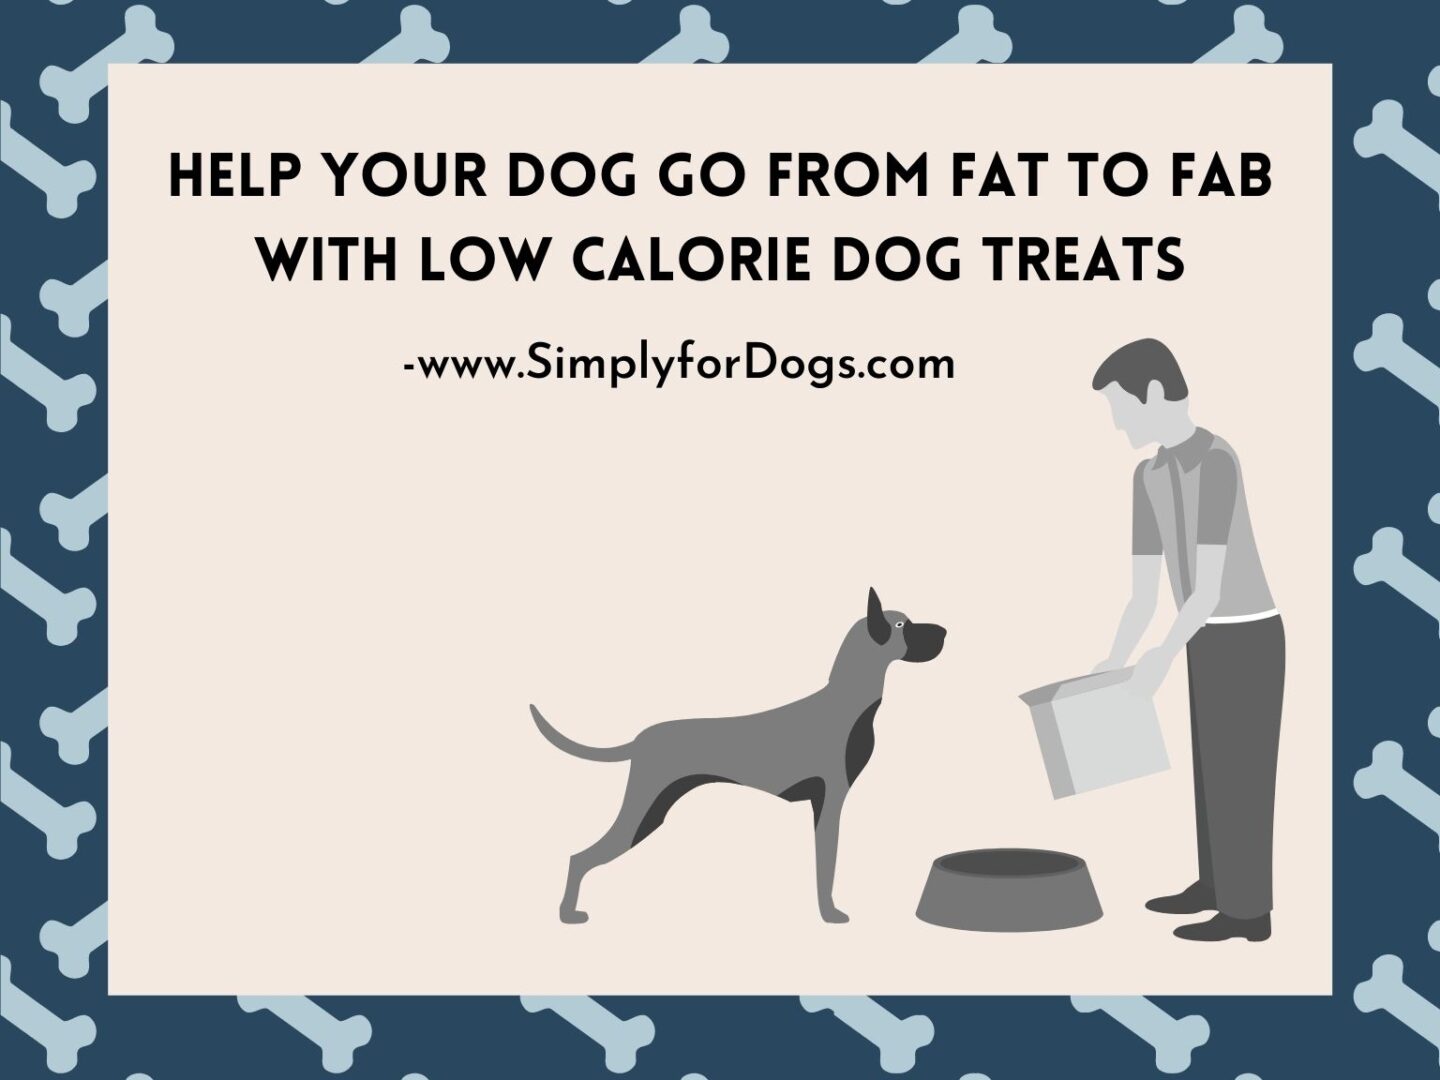 Help Your Dog Go from Fat to Fab with Low Calorie Dog Treats